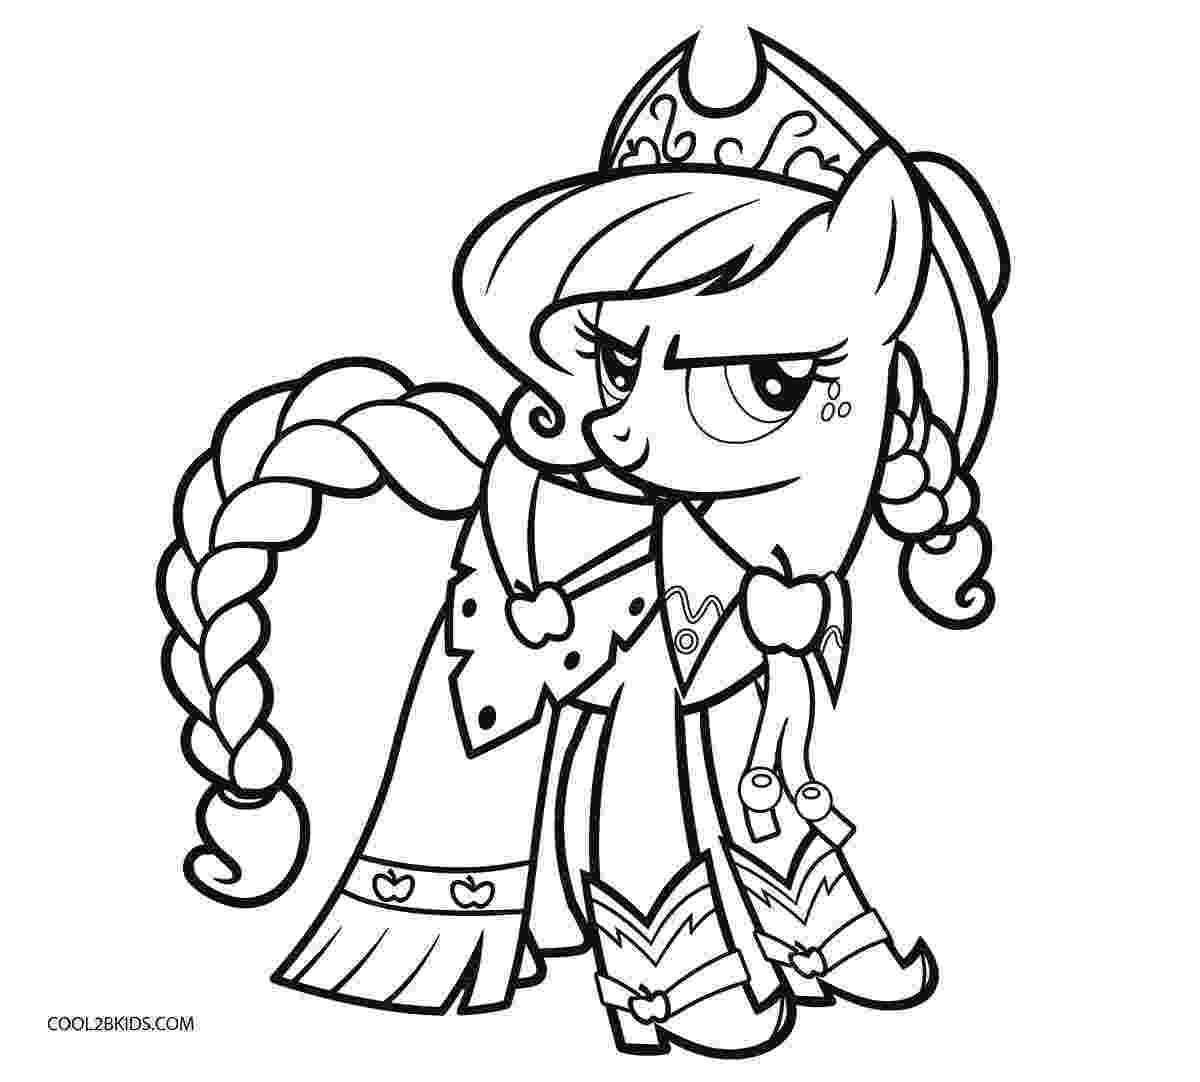 my little pony pictures to colour my little pony the movie coloring pages to download and pony pictures little my to colour 